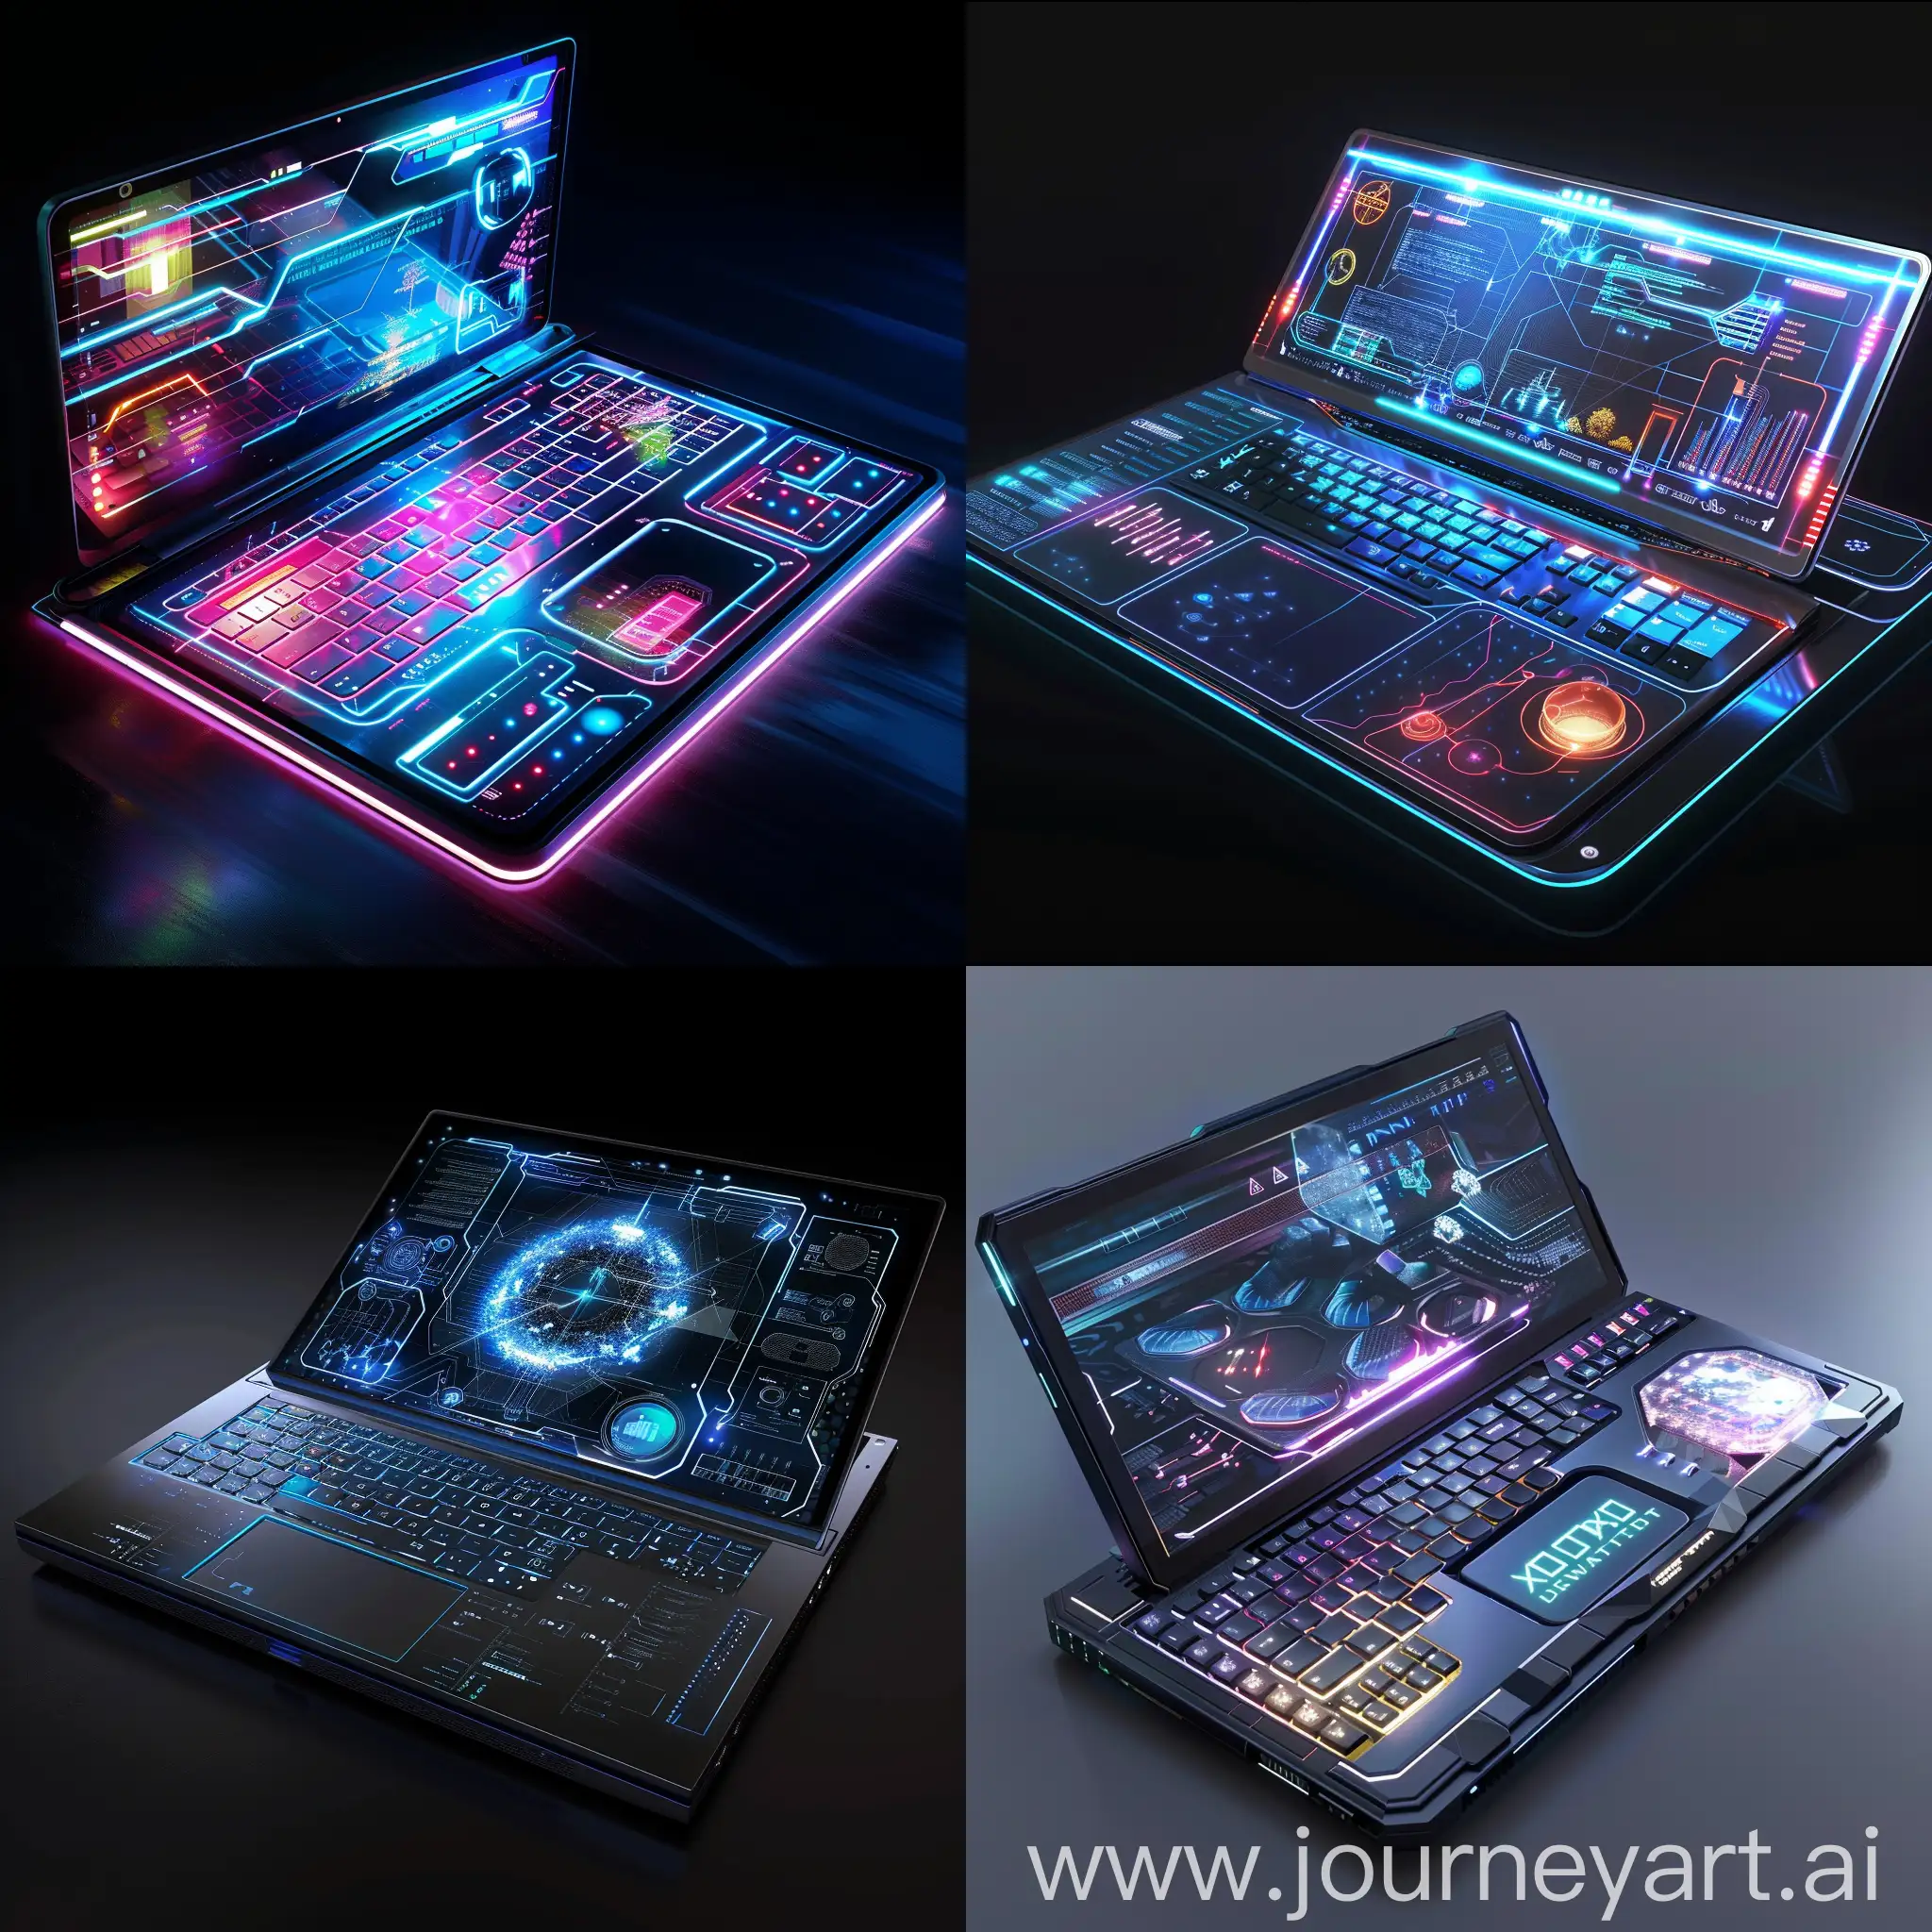 Futuristic-SciFi-Laptop-with-Quantumdot-Displays-and-NanoMemory-Technology